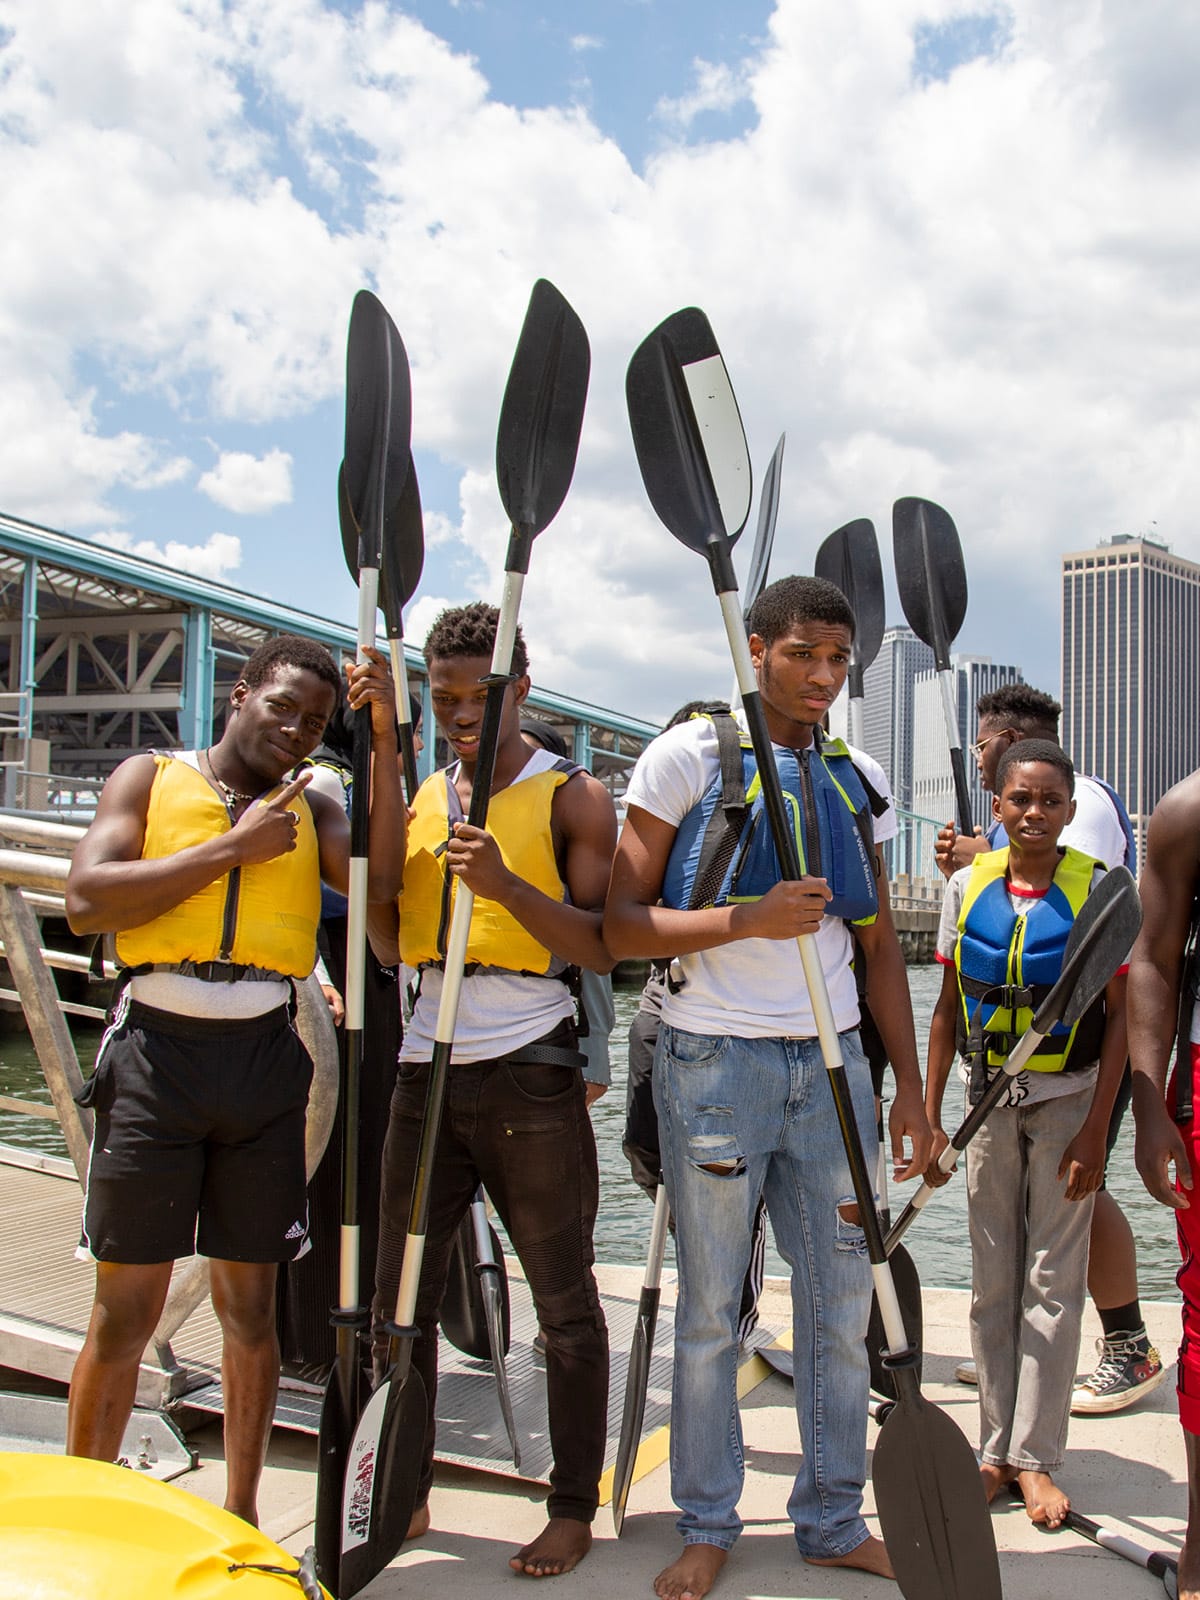 Group of teens holding kayak paddles on the dock on a sunny day.